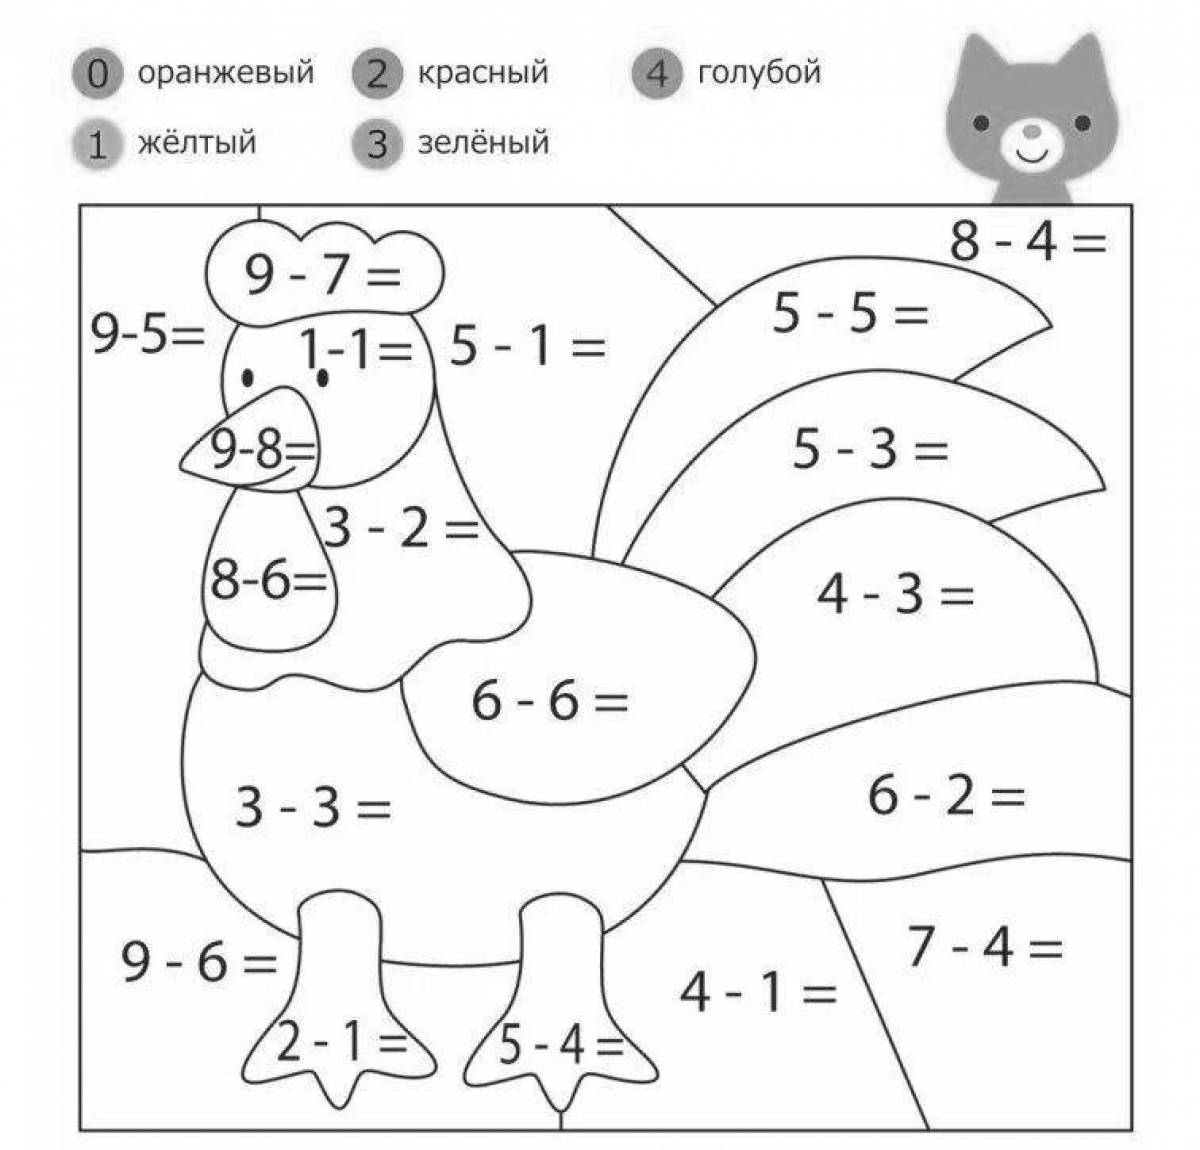 Playful math coloring book for kids 5-7 years old